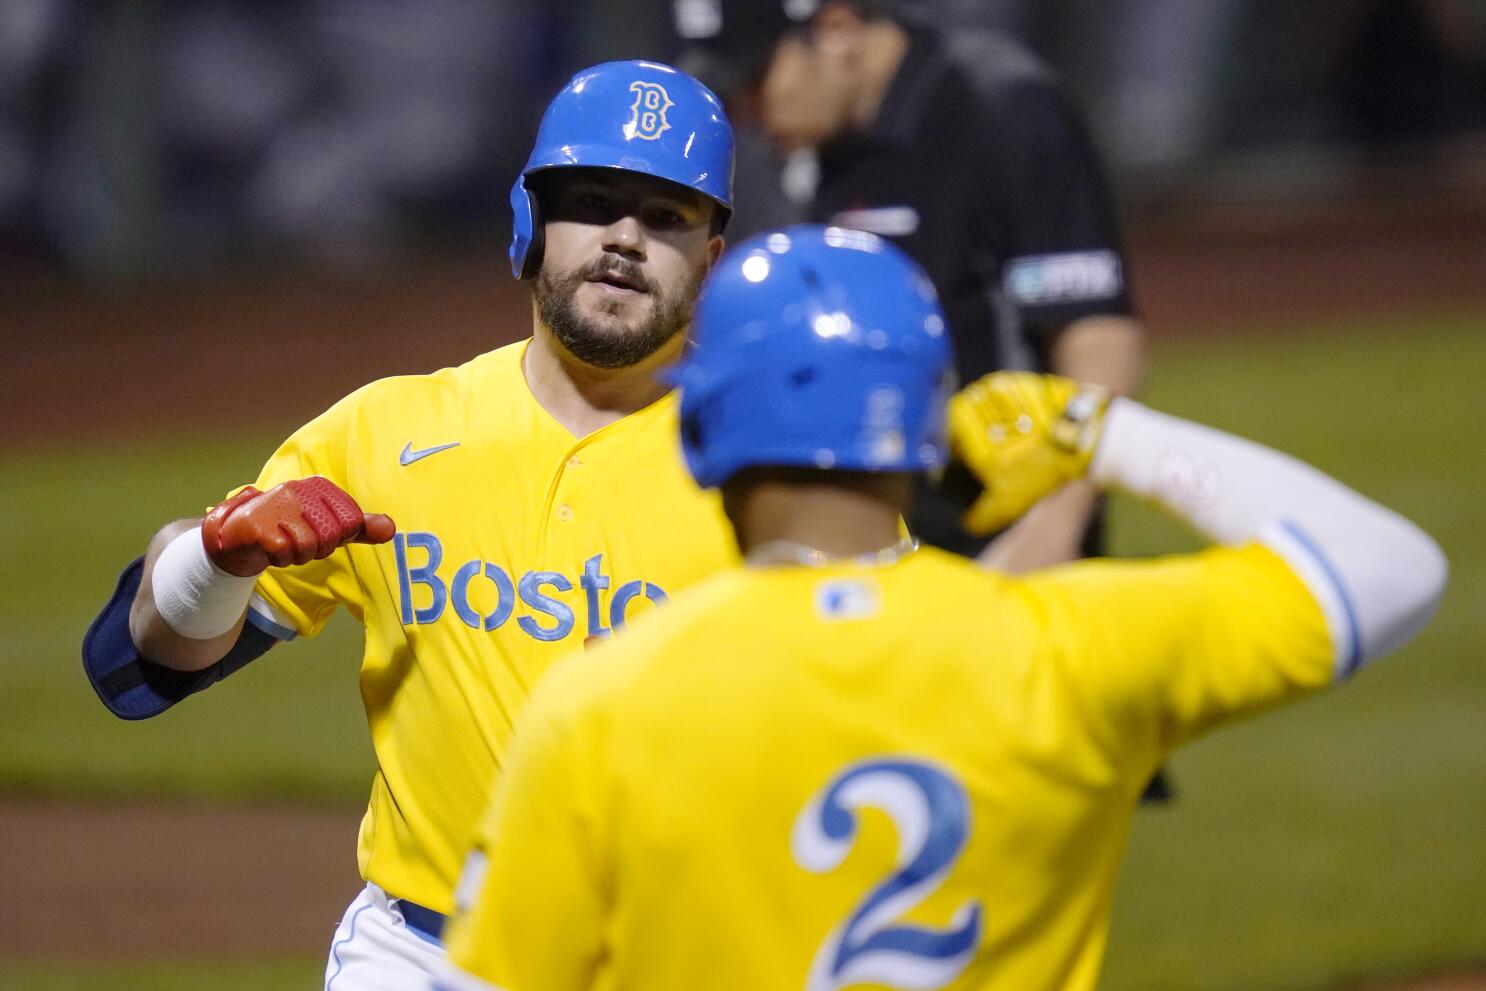 Boston Red Sox uniforms: Why are the Sox wearing yellow and blue